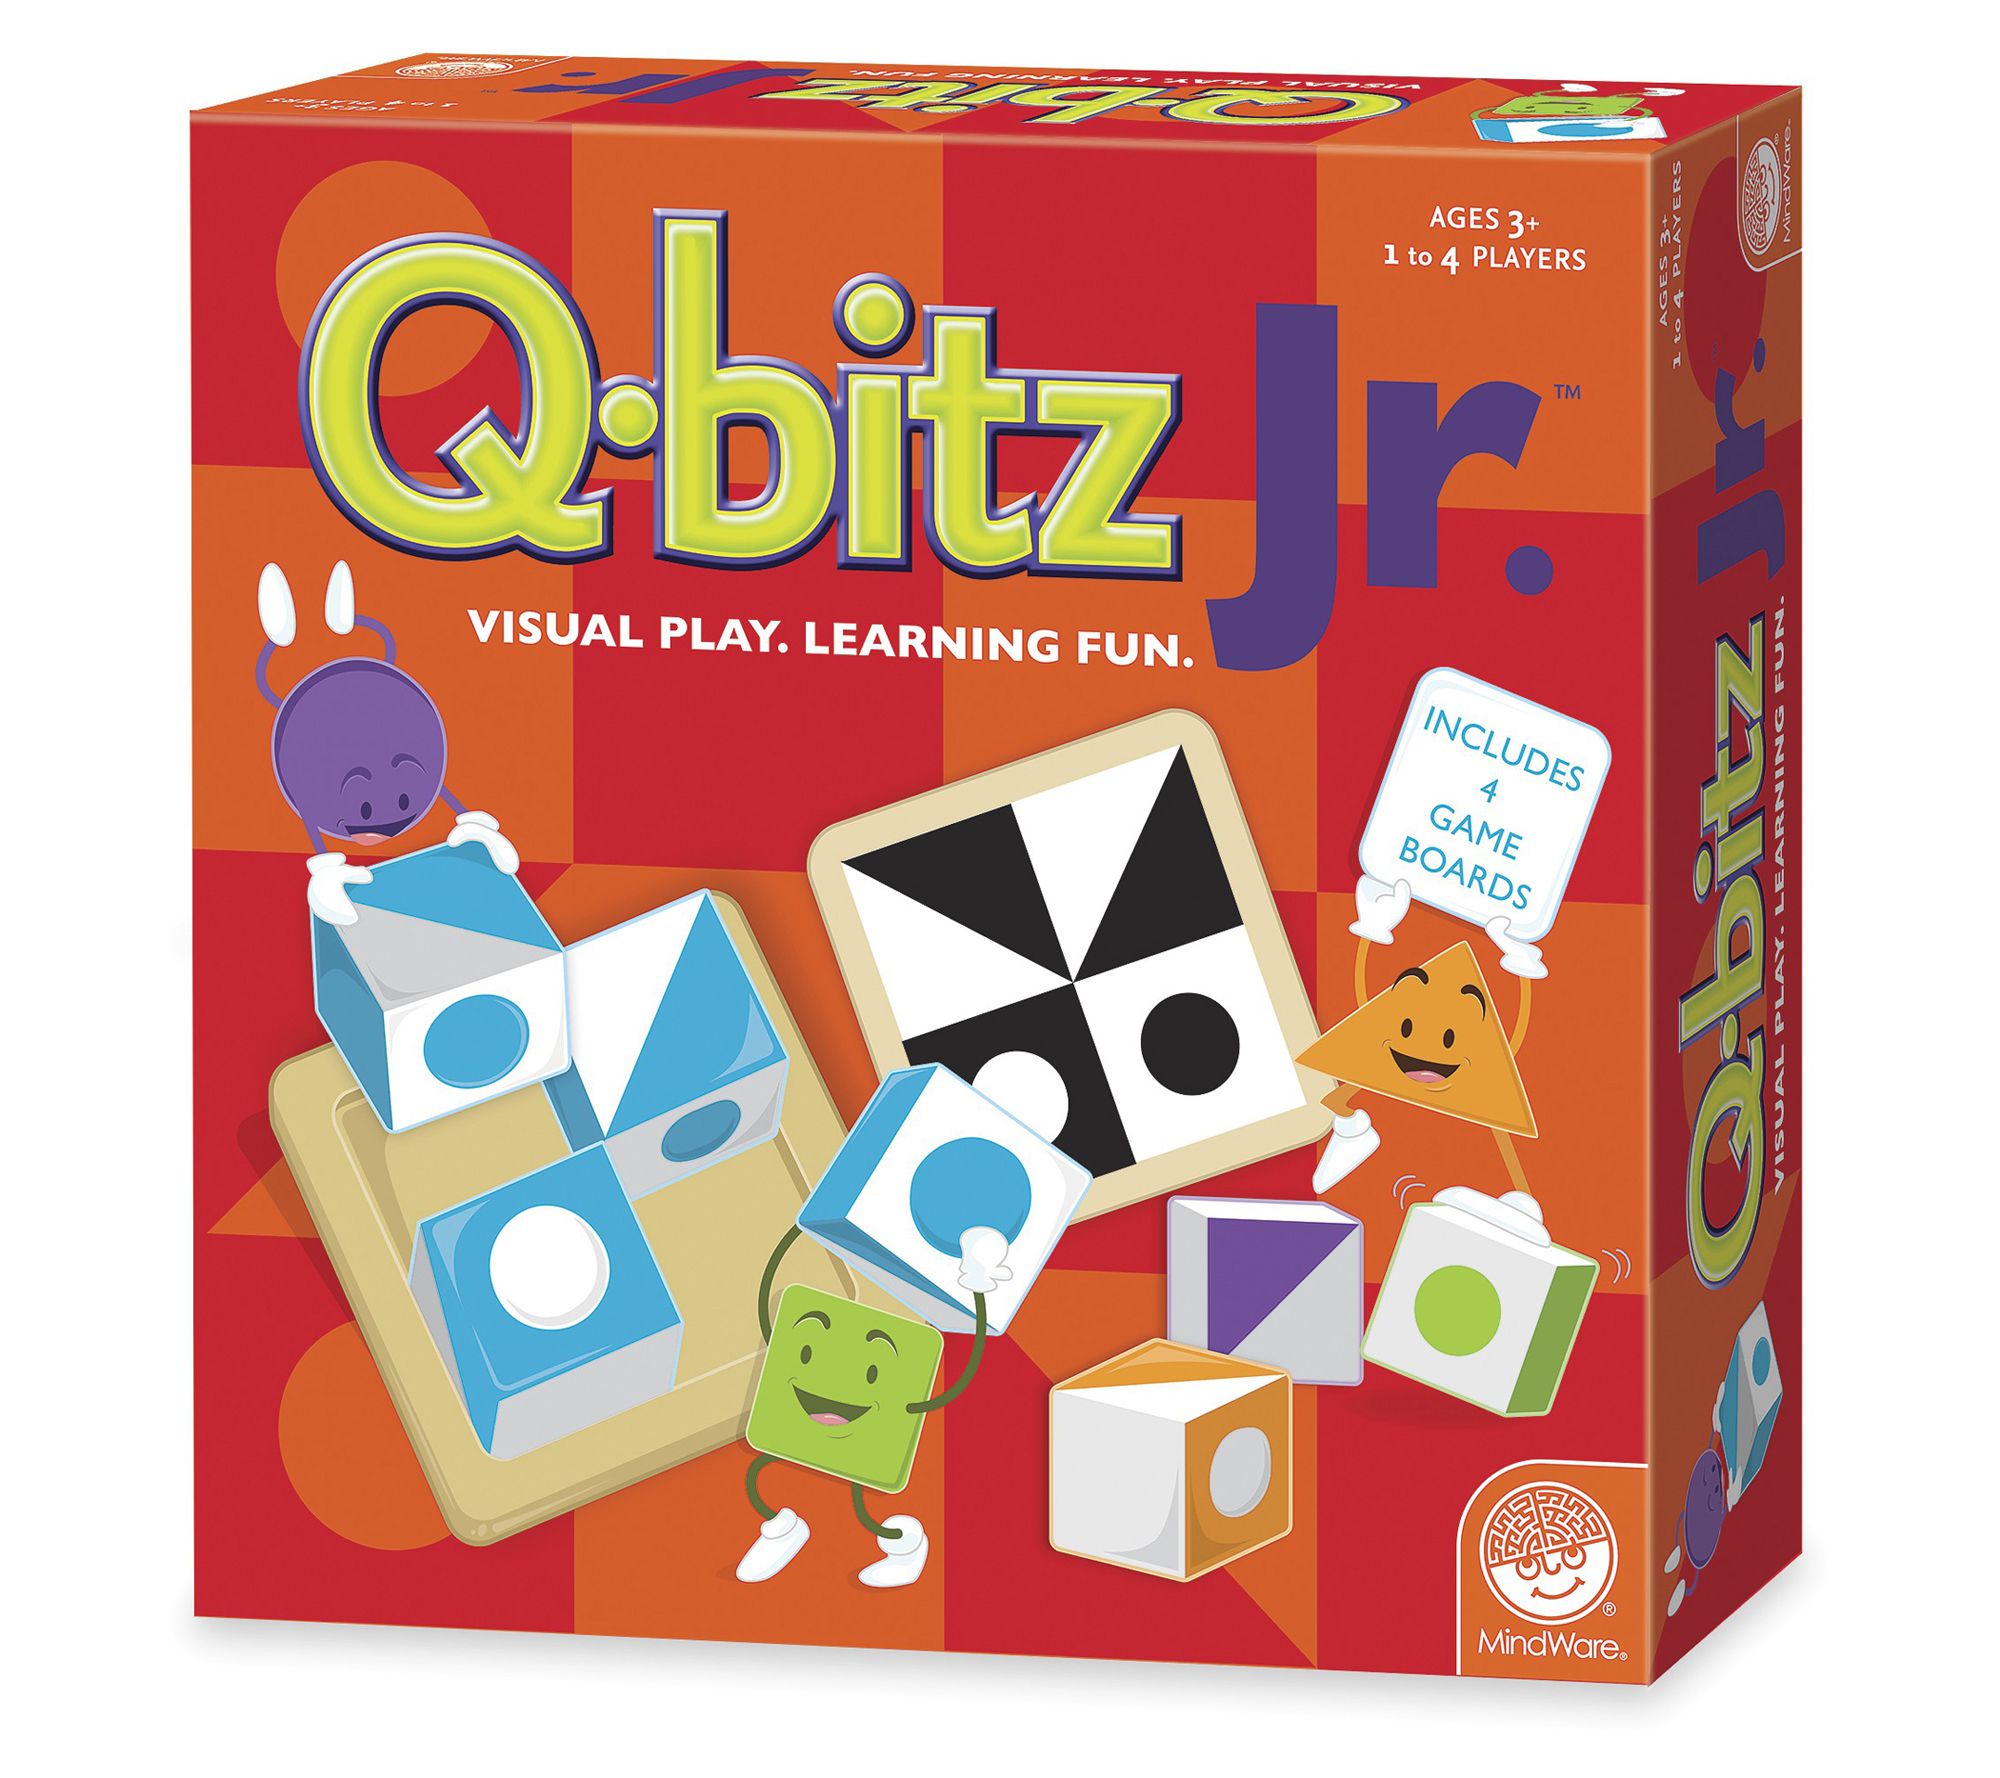 How to play Q-Bitz 